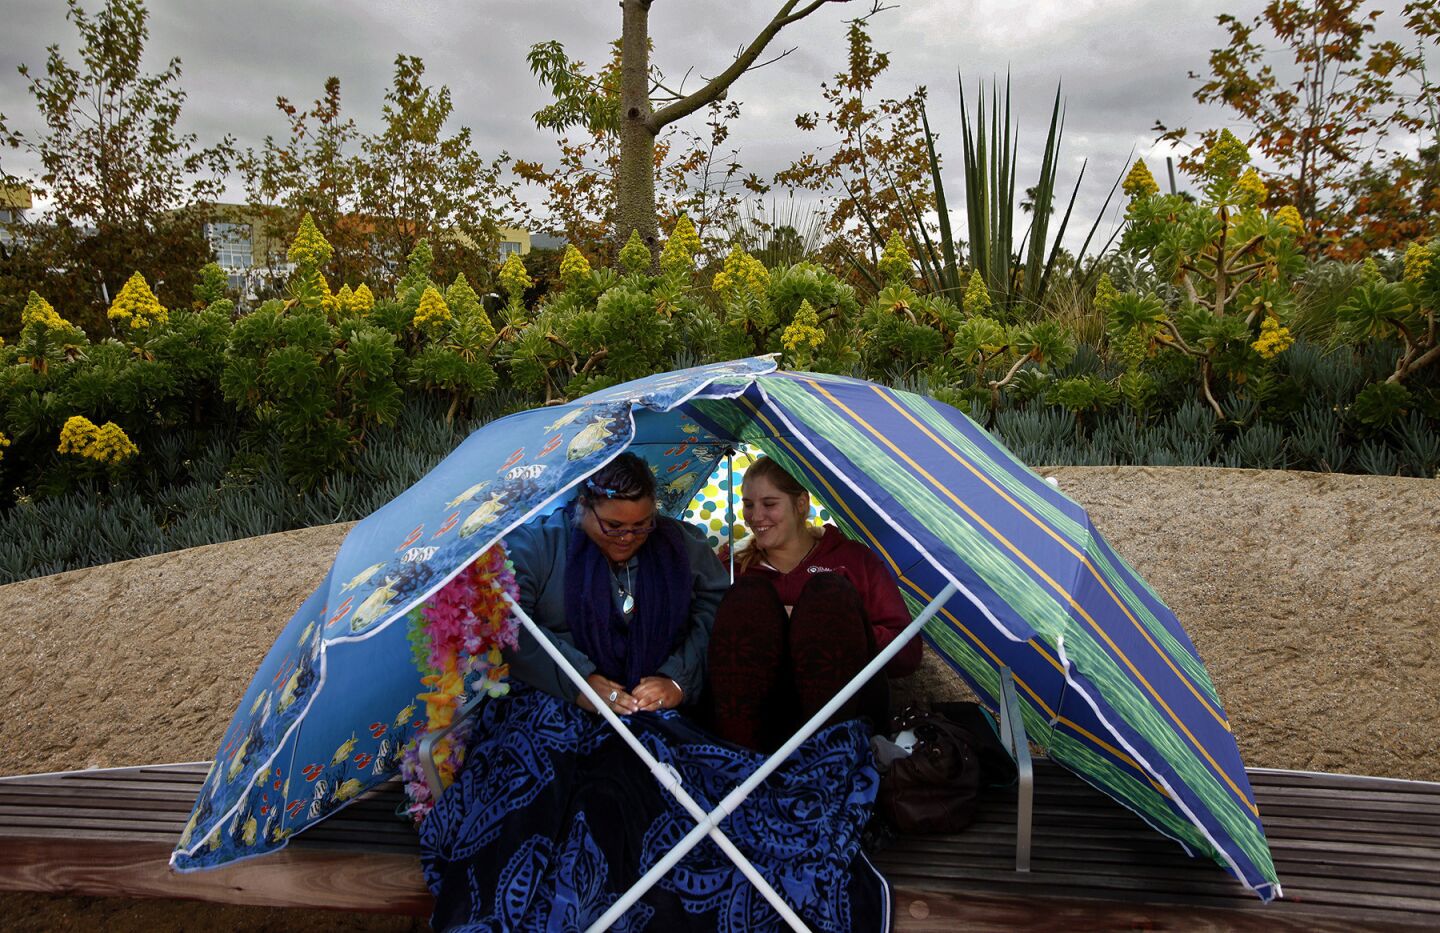 Santa Monica College students Nicole Nicks, left, and Krysta Zeldin, stay dry under the big umbrellas they brought Tuesday to Tongva Park in Santa Monica to celebrate the completion of finals.